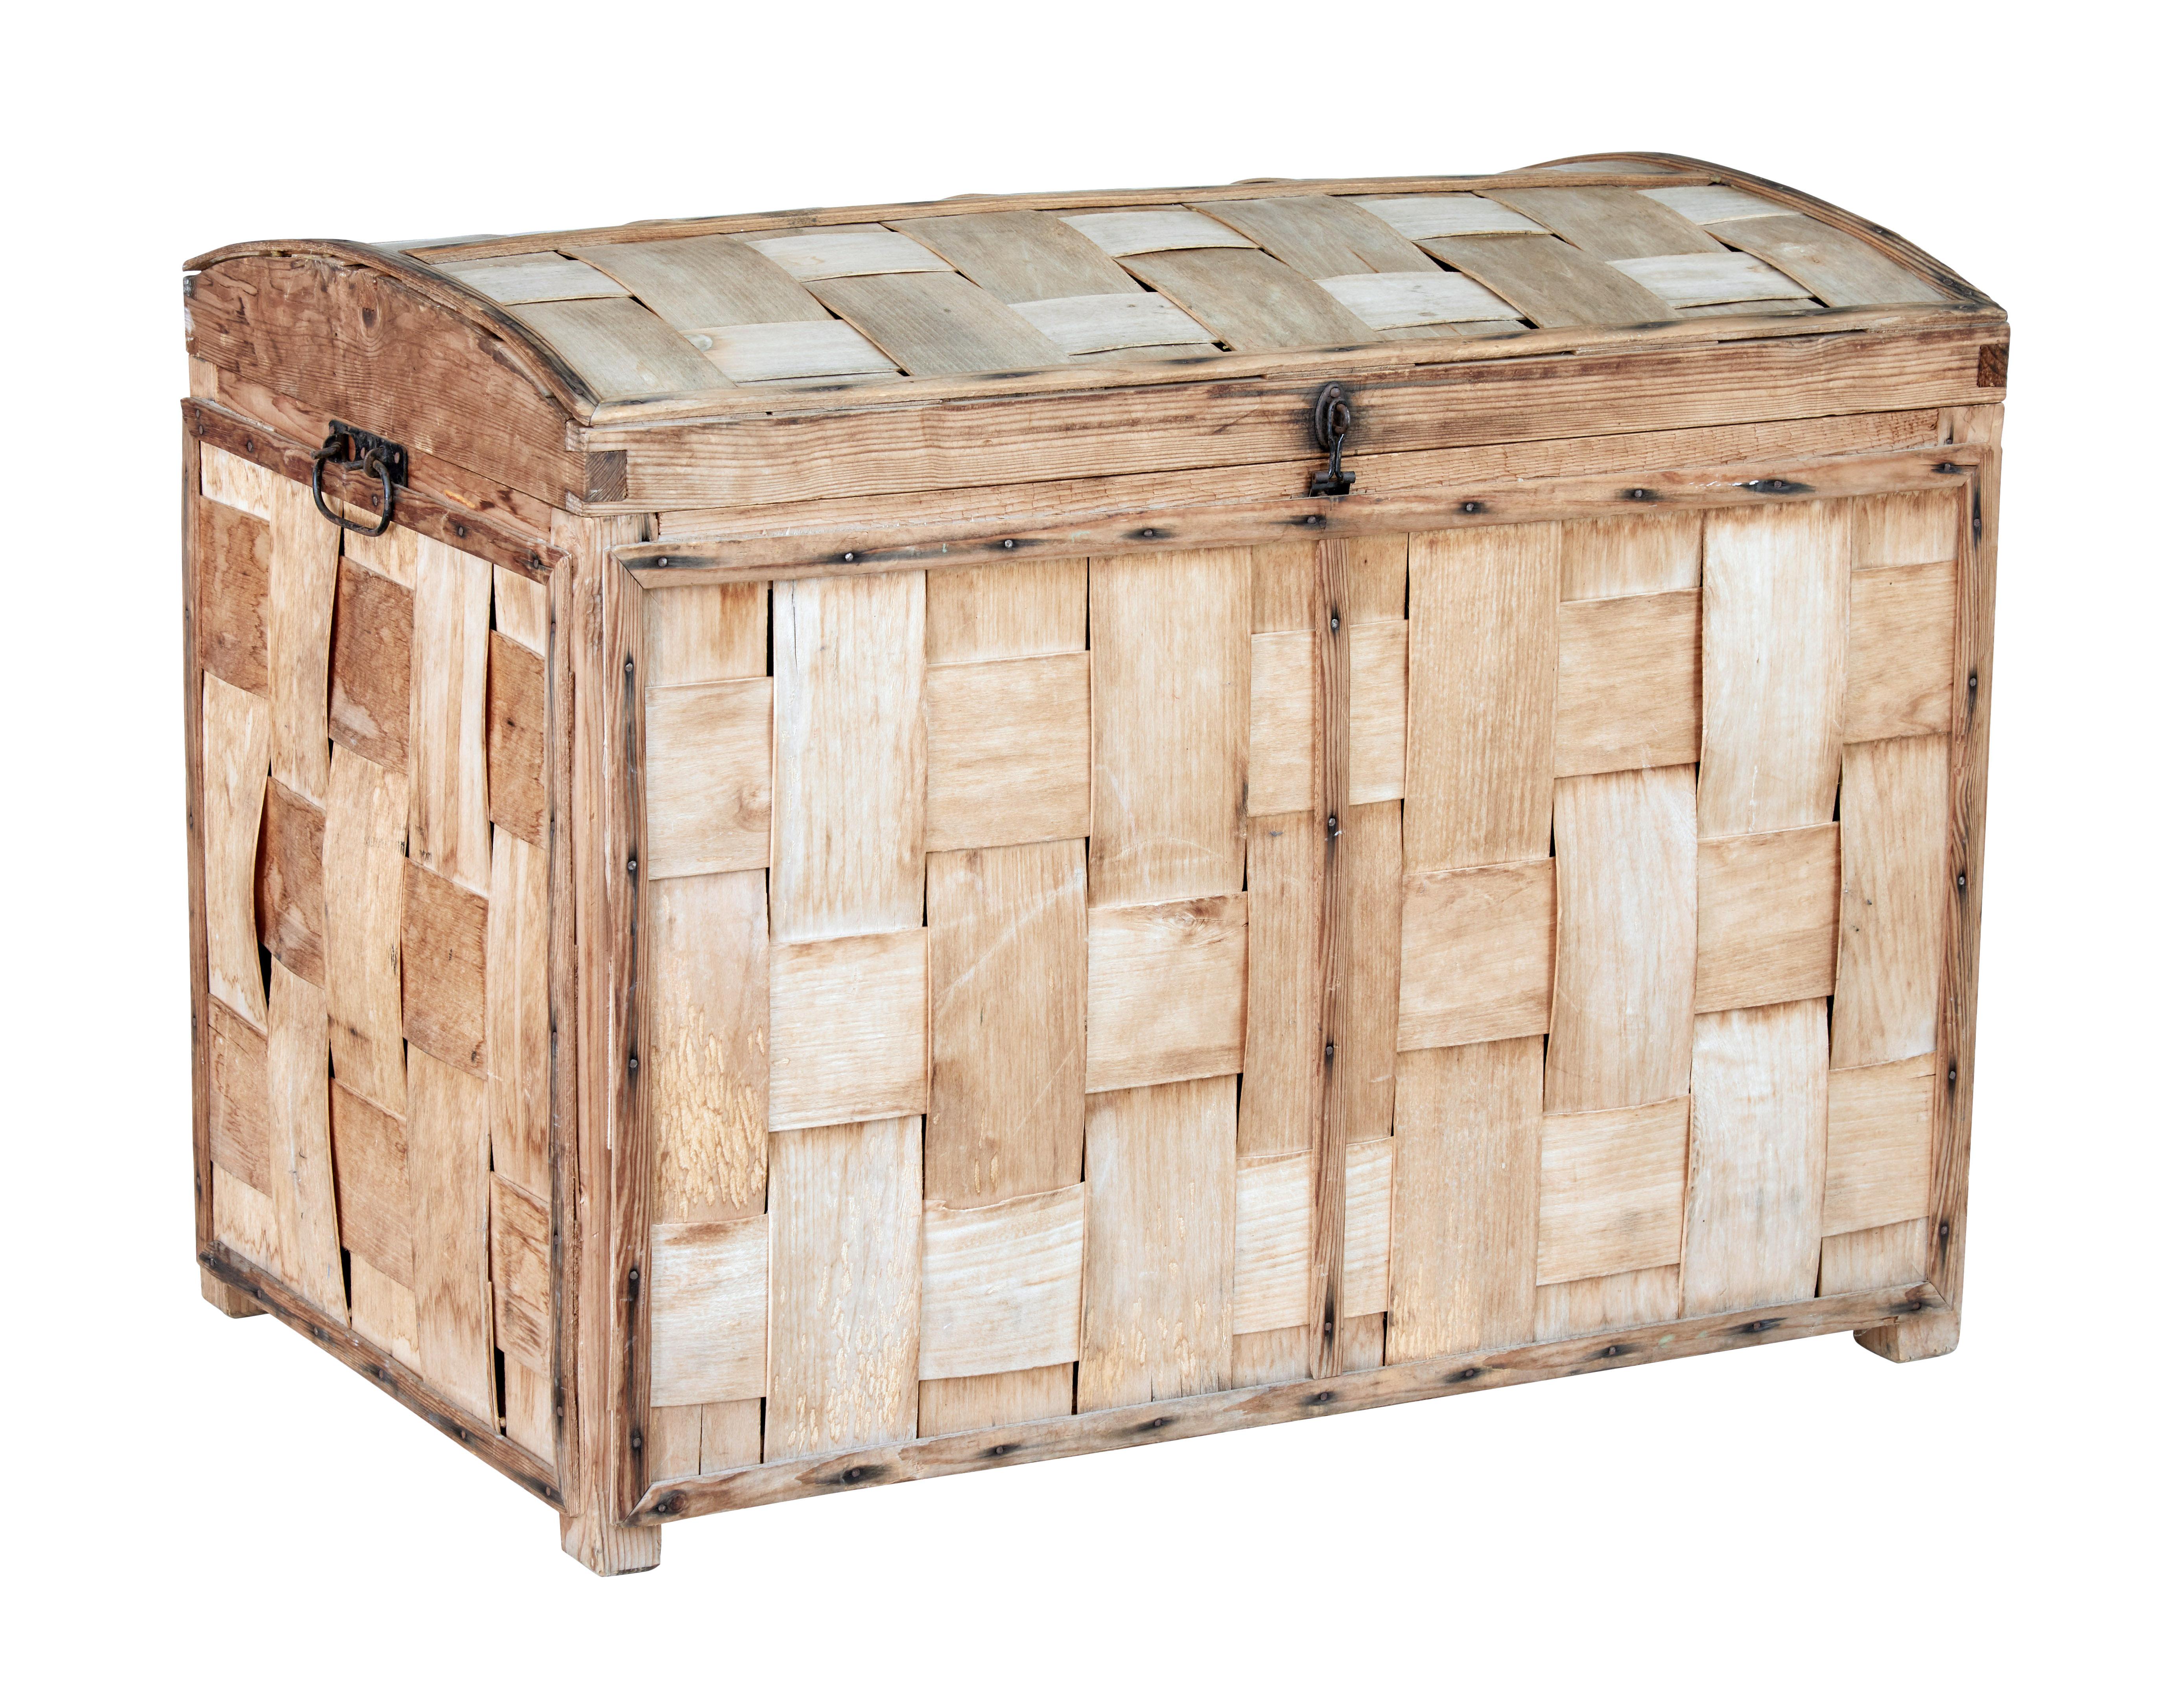 Unusual 19th century woven pine dome top trunk, circa 1890.

Scandinavian trunk made from inter woven strips of pine, with an outer pine frame. Hinged dome top lid with securing latch.

Minor surface marks and natural fading, ready for everyday